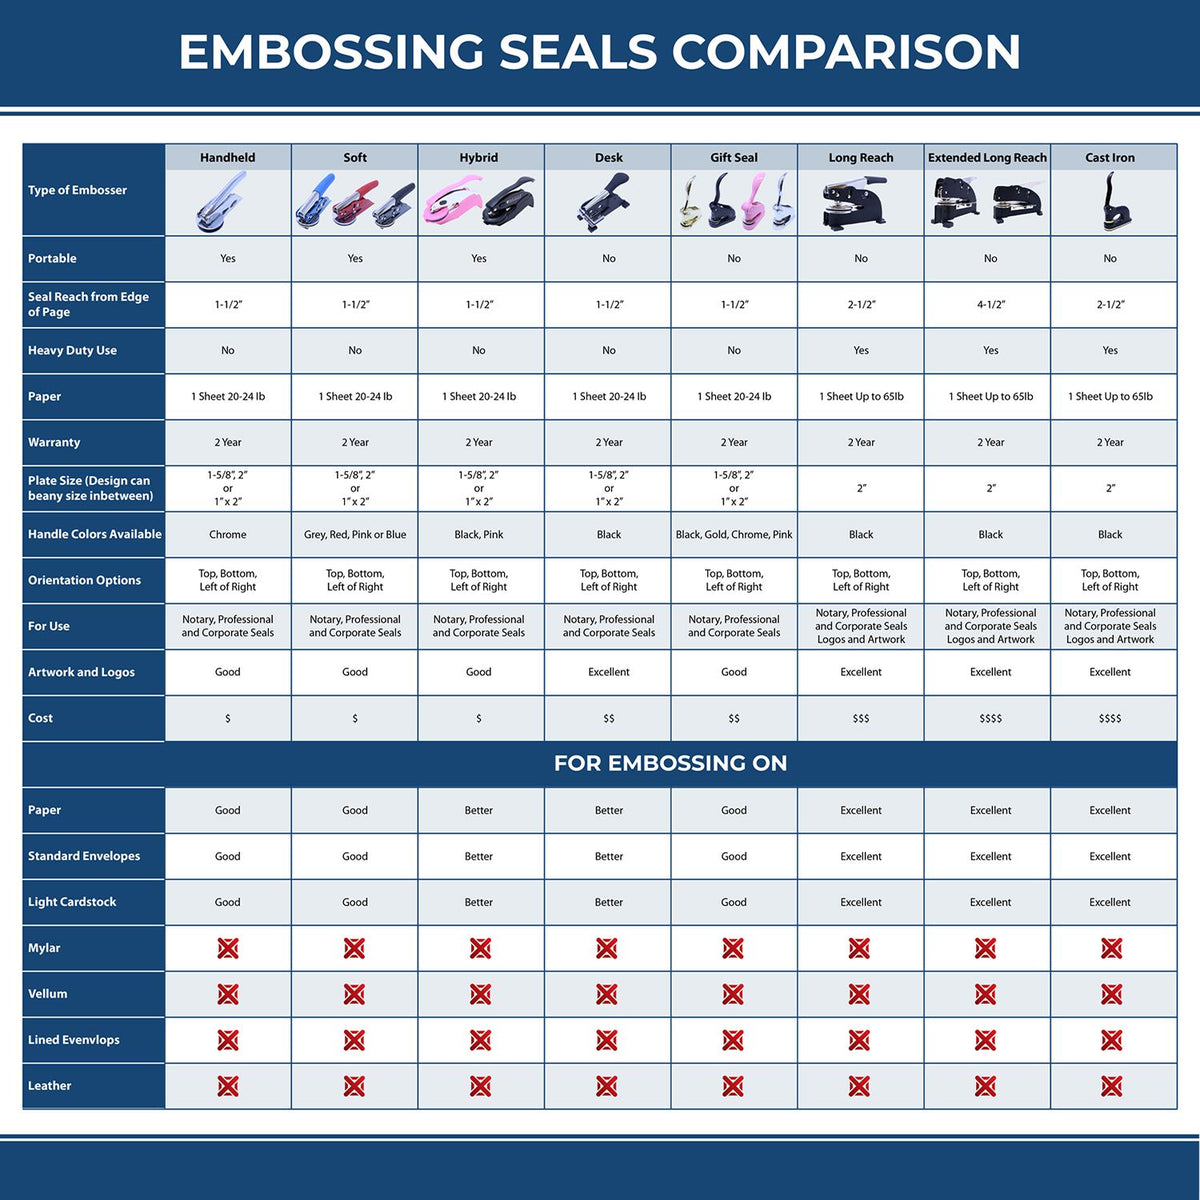 A comparison chart for the different types of mount models available for the Hybrid Guam Land Surveyor Seal